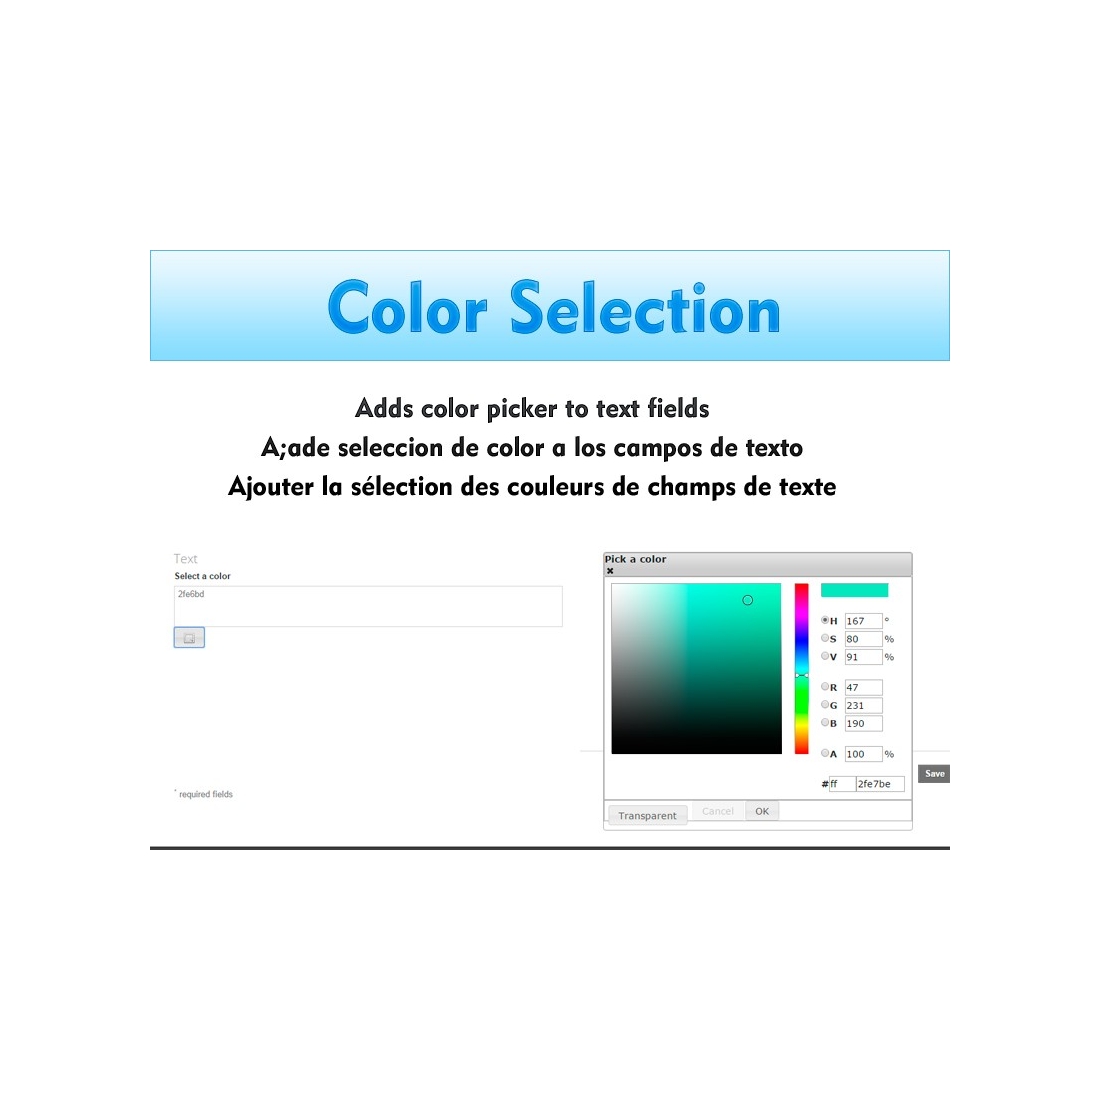 color-selection-for-text-fields.jpg